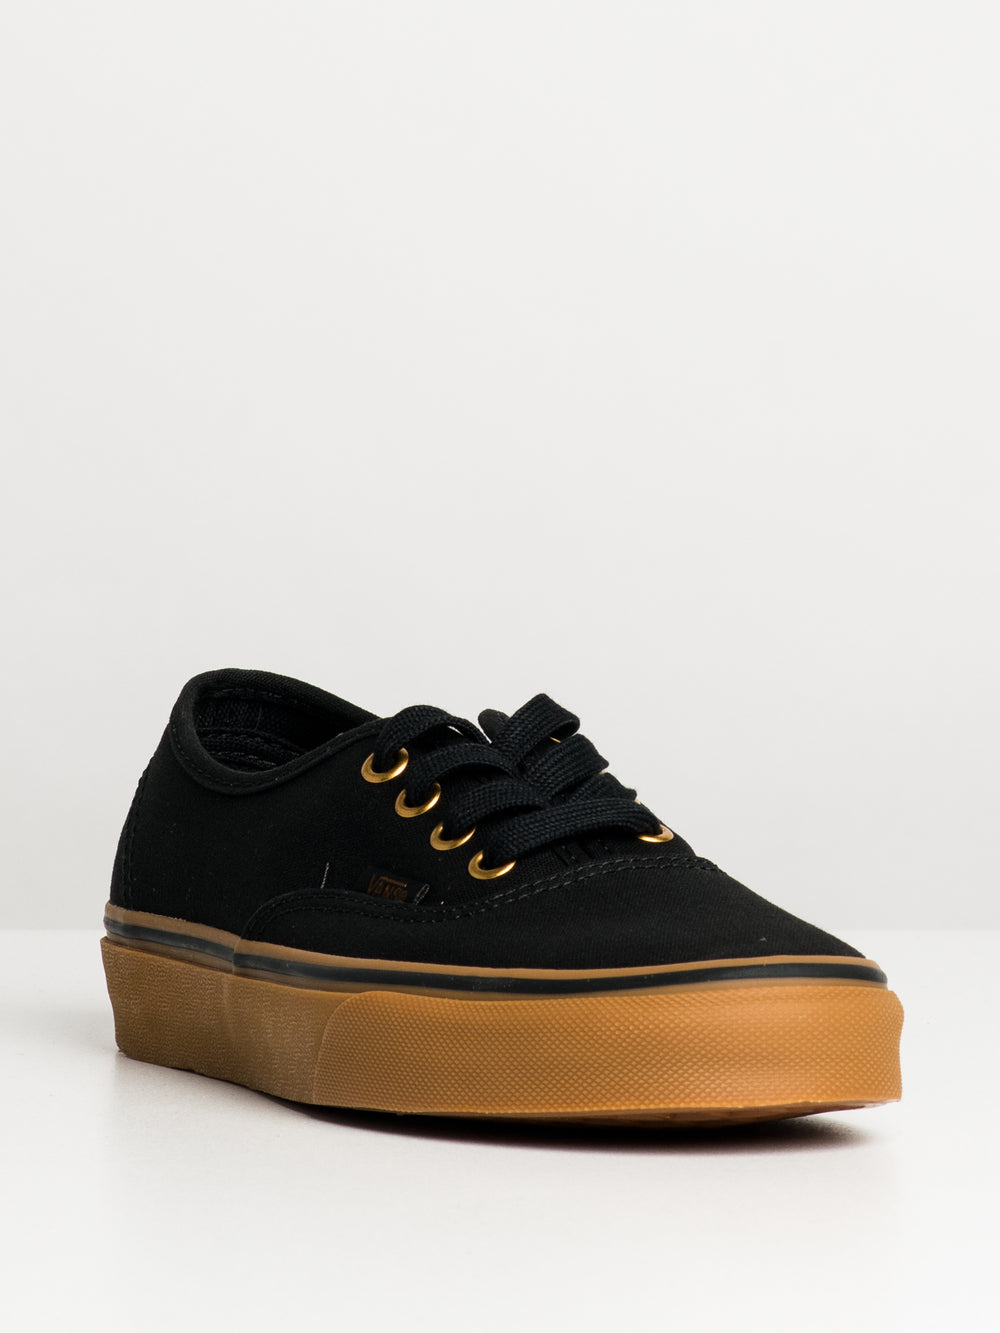 WOMENS VANS AUTHENTIC - CLEARANCE